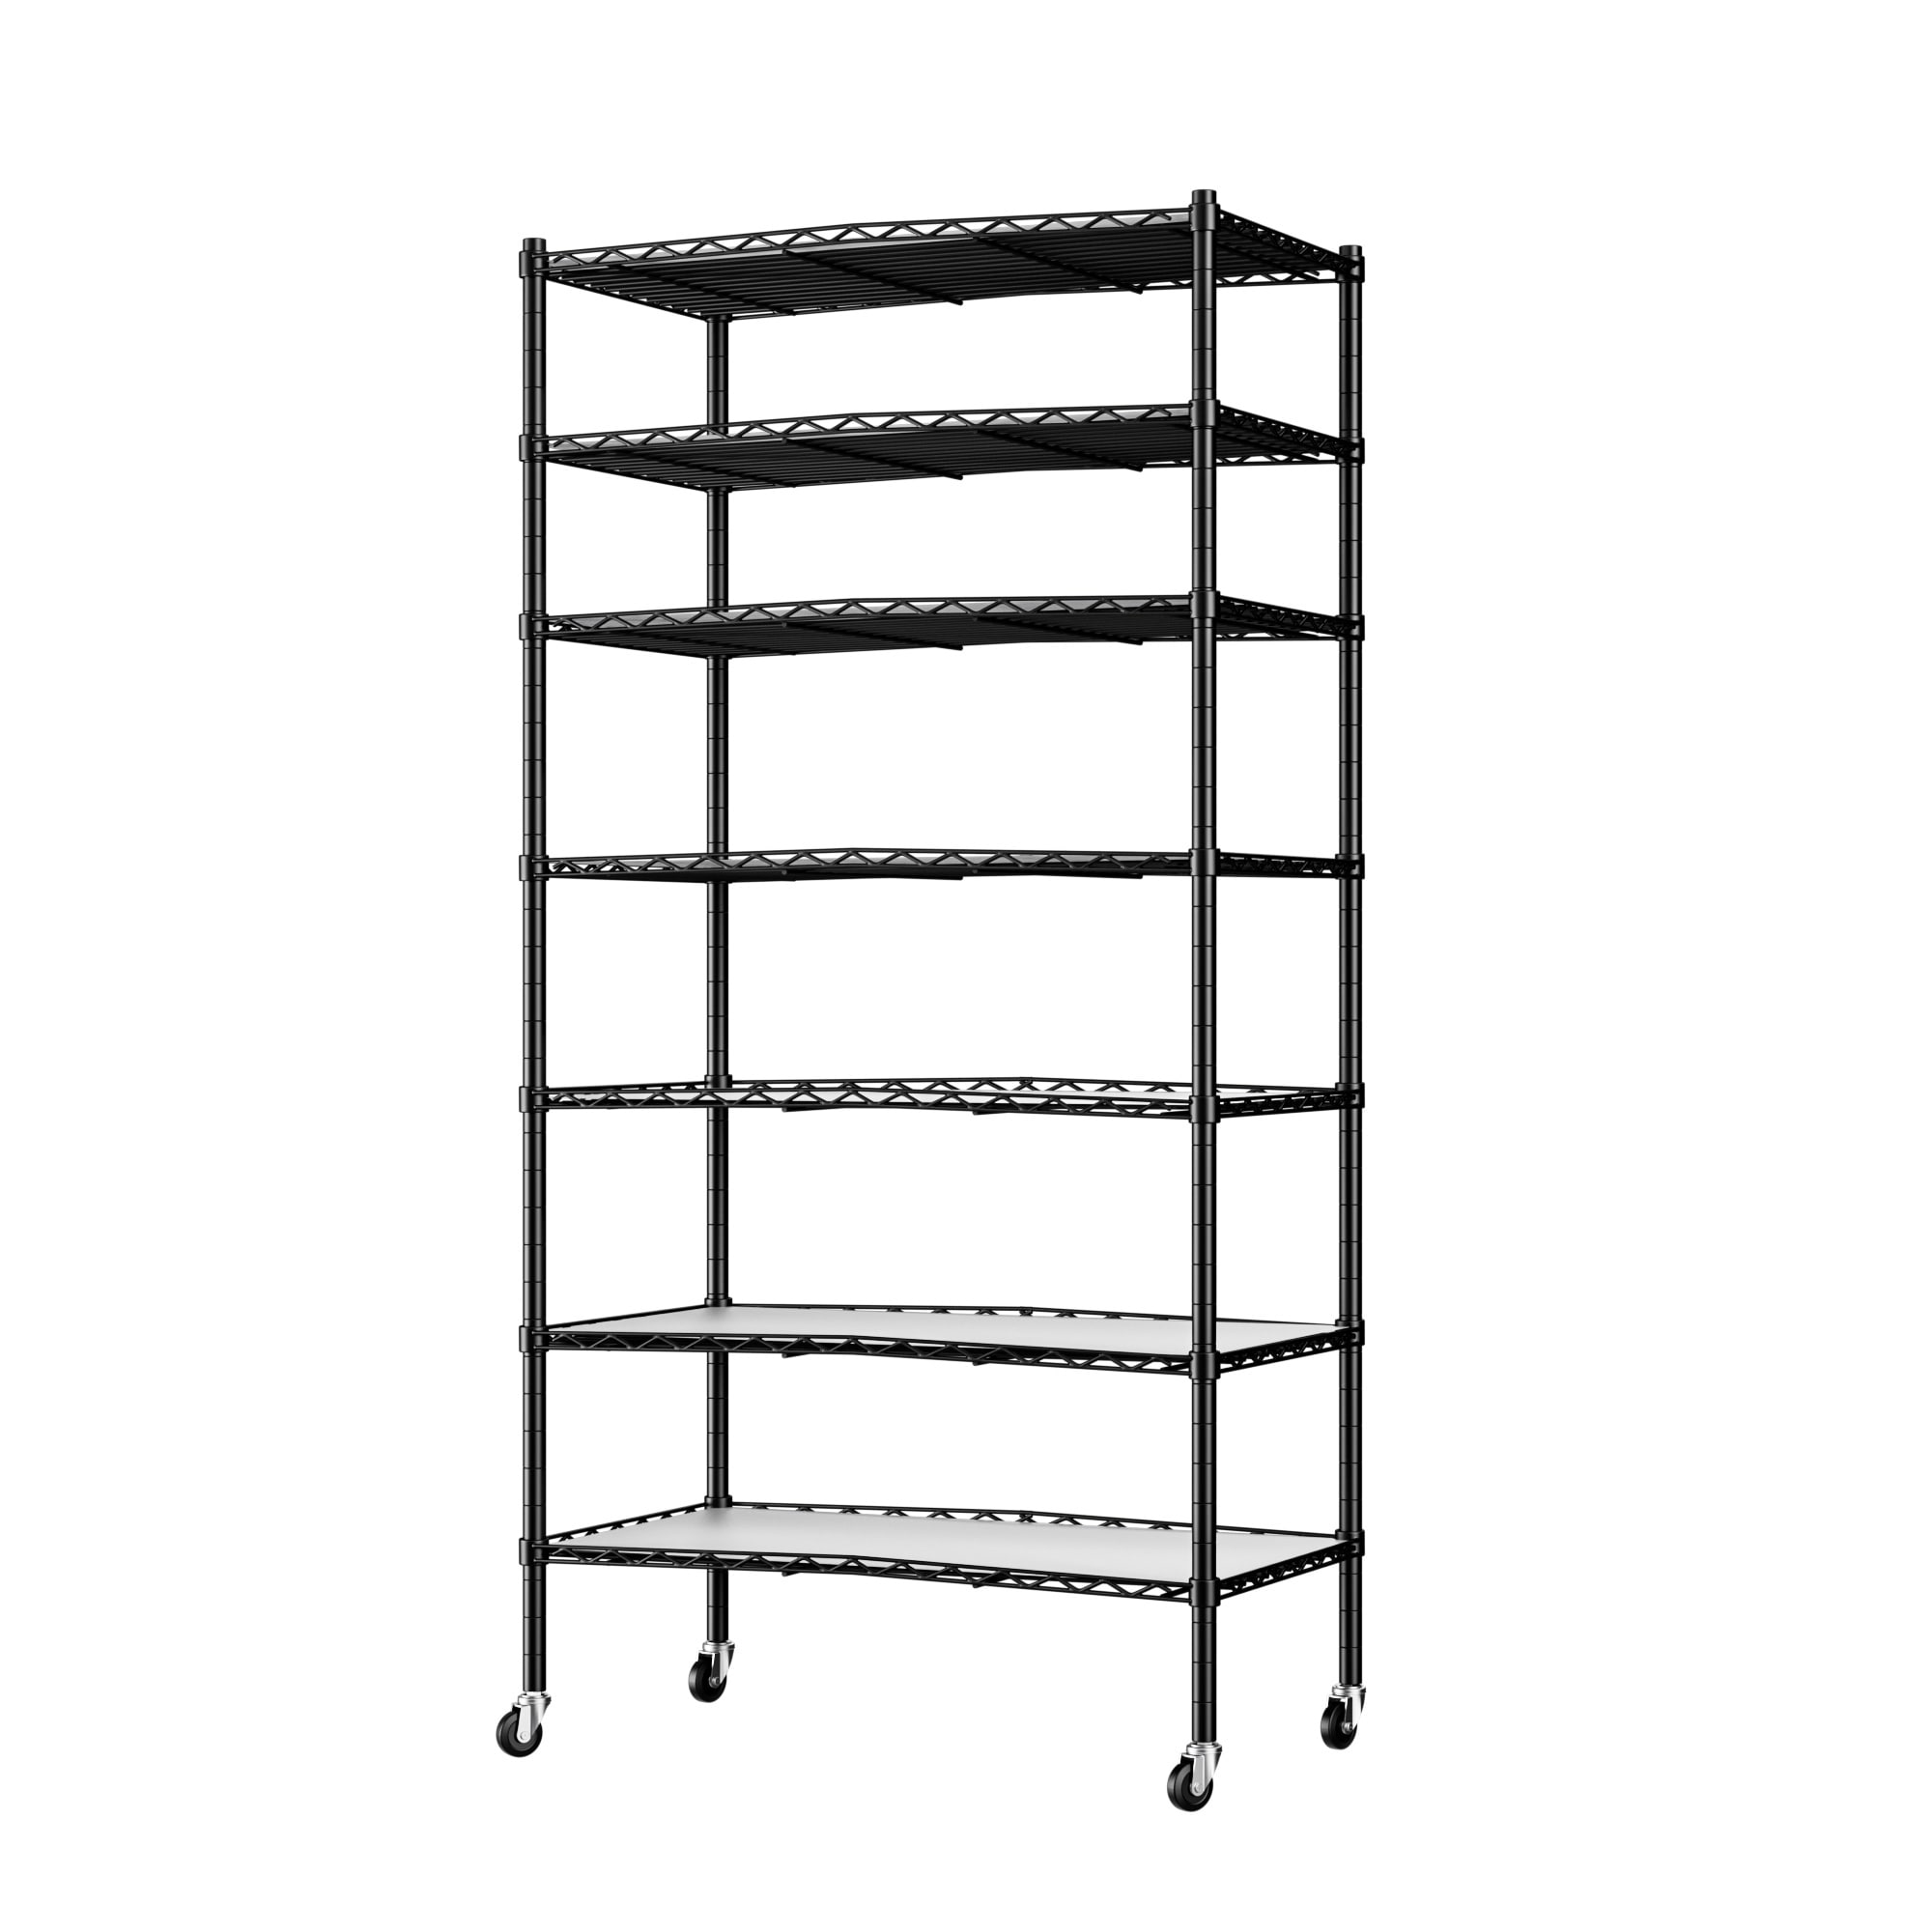 https://ak1.ostkcdn.com/images/products/is/images/direct/2bd6abe6e32a7054284f37849cf19dfe1bc43748/7-Tier-Wire-Shelving-Unit-Adjustable-Metal-Garage-Storage-Shelves-with-Wheels.jpg